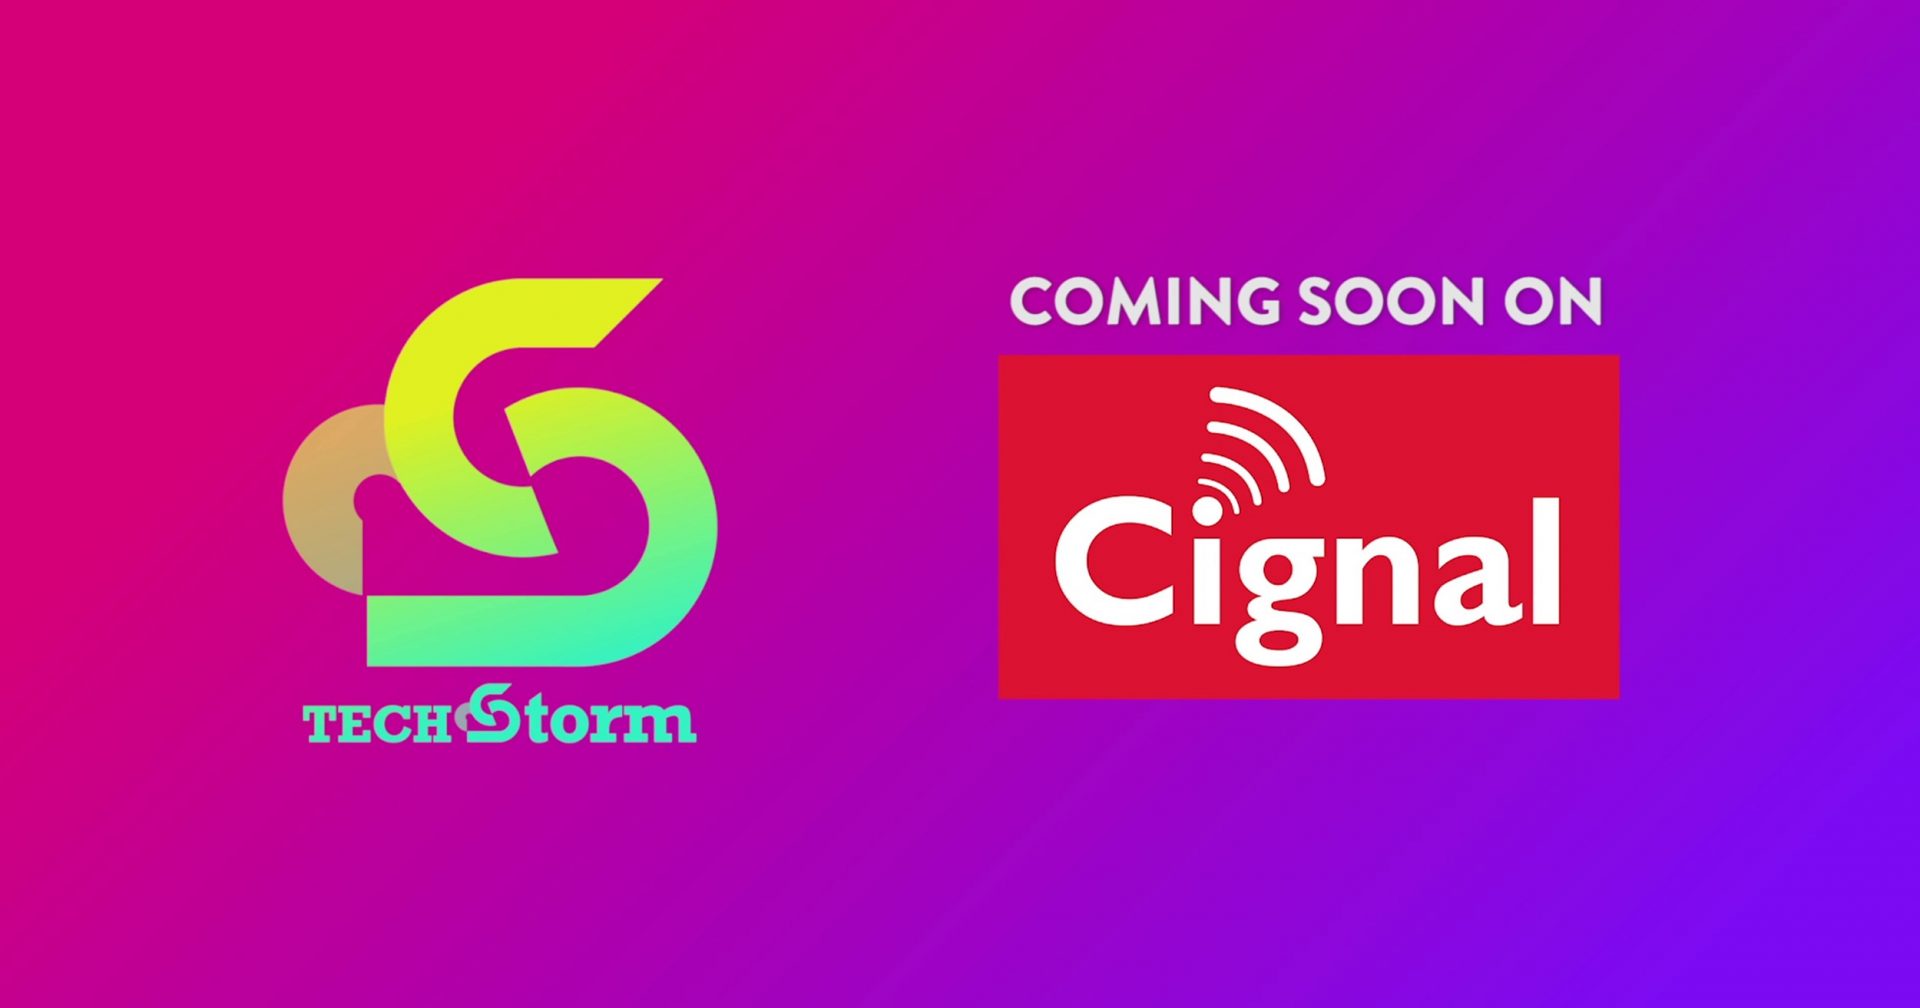 Cignal TV’s Inaugural Launch of TechStorm on its OTT Platform in Philippines starts in August